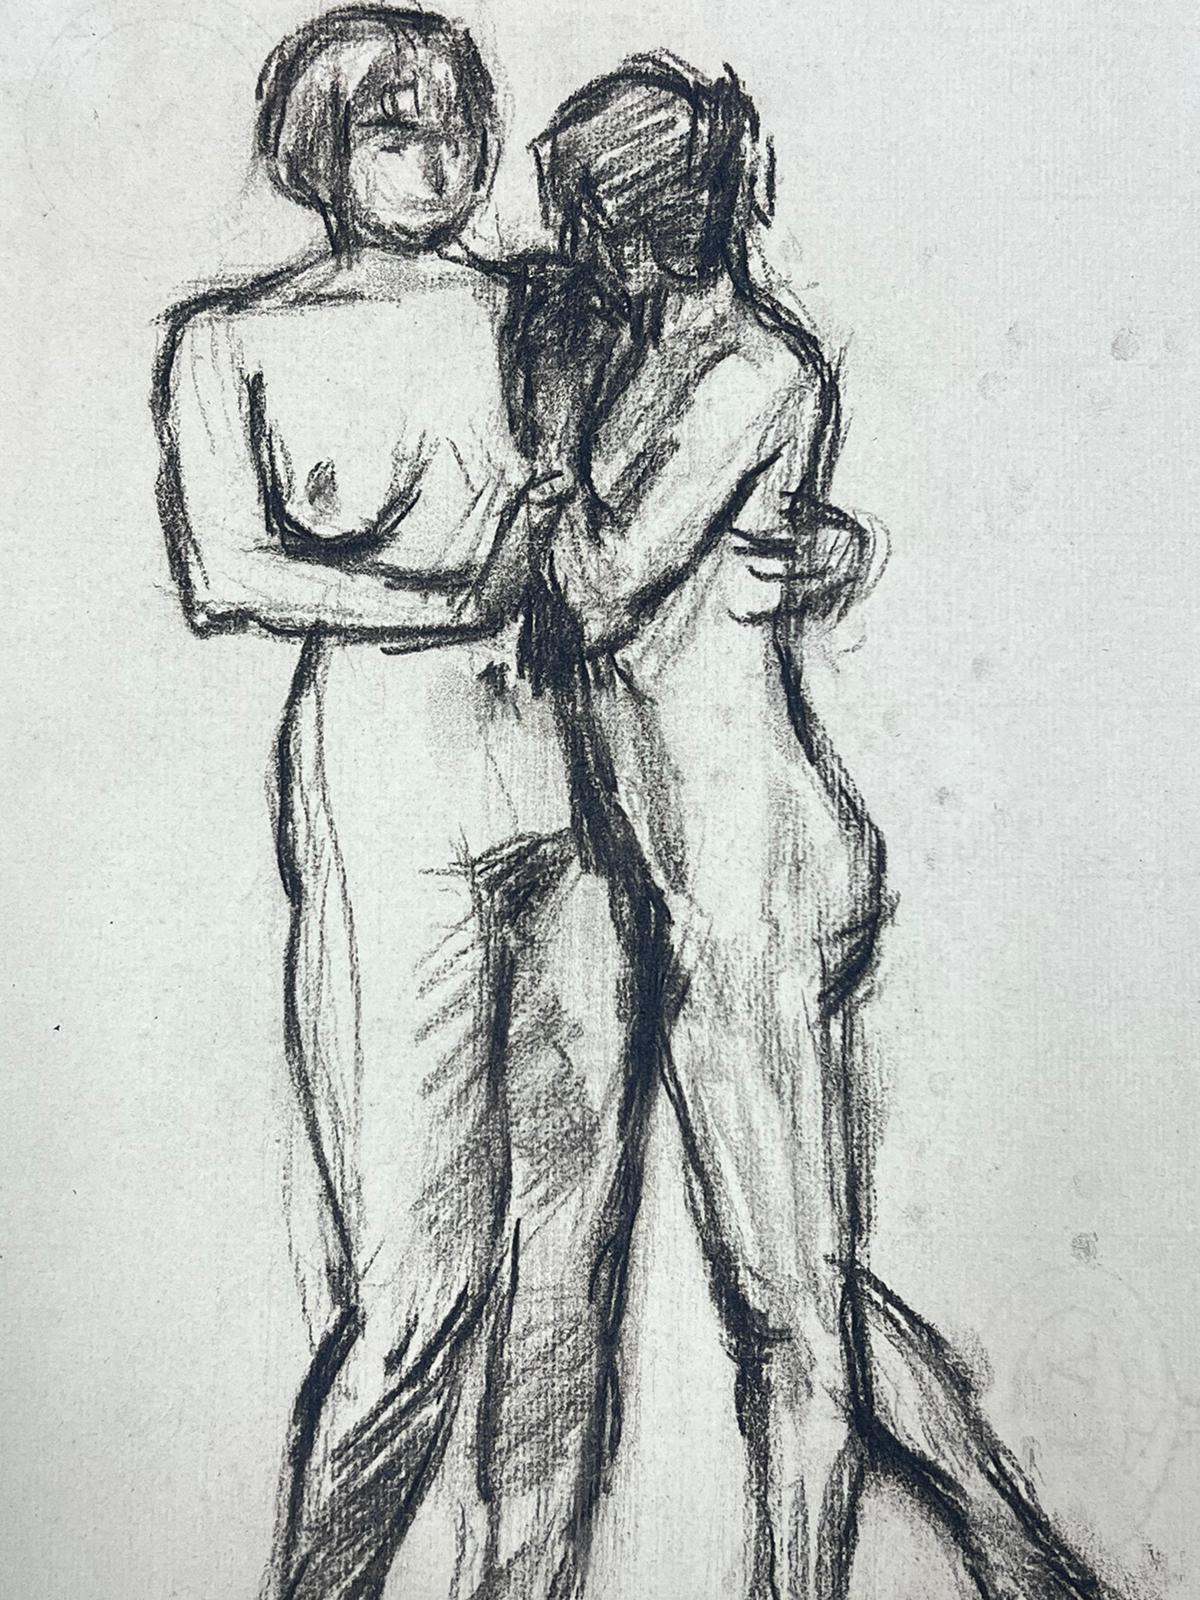 Comforting Figures
by Louise Alix (French, 1888-1980) *see notes below
provenance stamp to the back 
charcoal drawing on artist paper, unframed
measures: 12 high by 9.5 inches wide
condition: overall very good and sound, a few scuffs and marks to